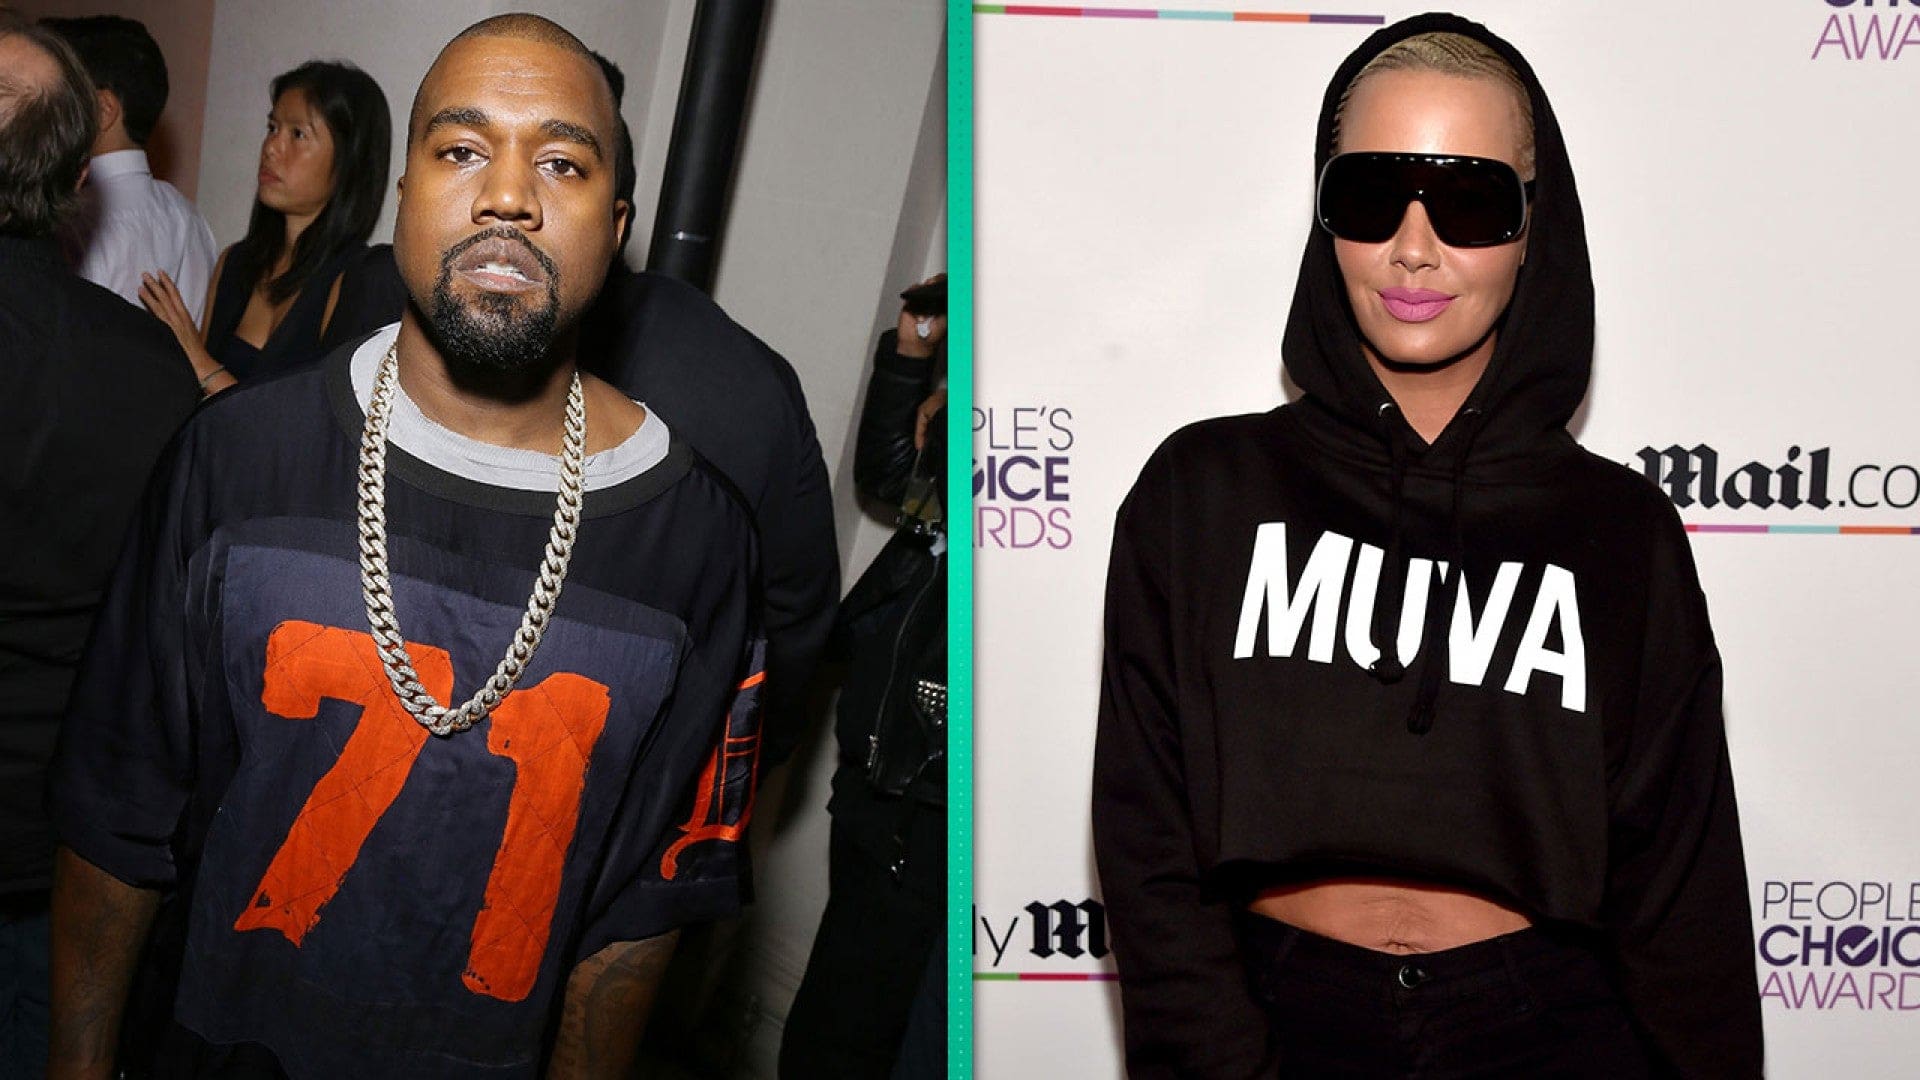 Amber Rose Celebrates Her 37th Birthday - She Also Asks Kanye West To Stop Bullying Her!